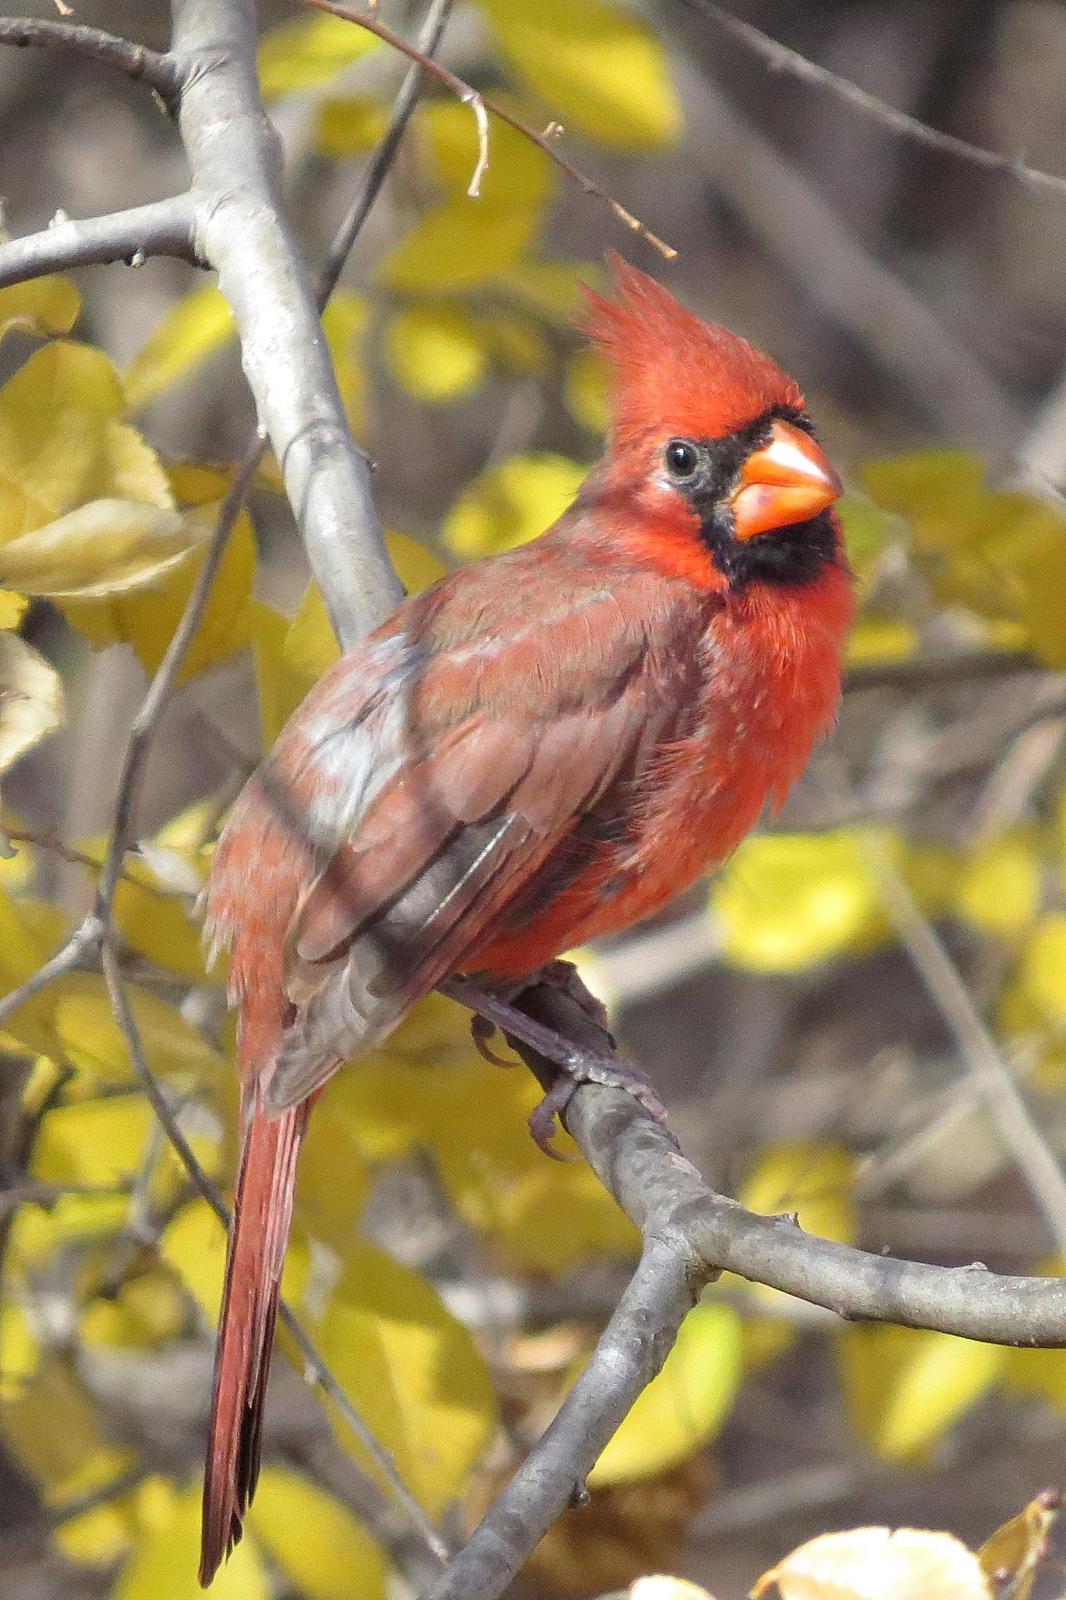 Northern Cardinal Photo by Enid Bachman